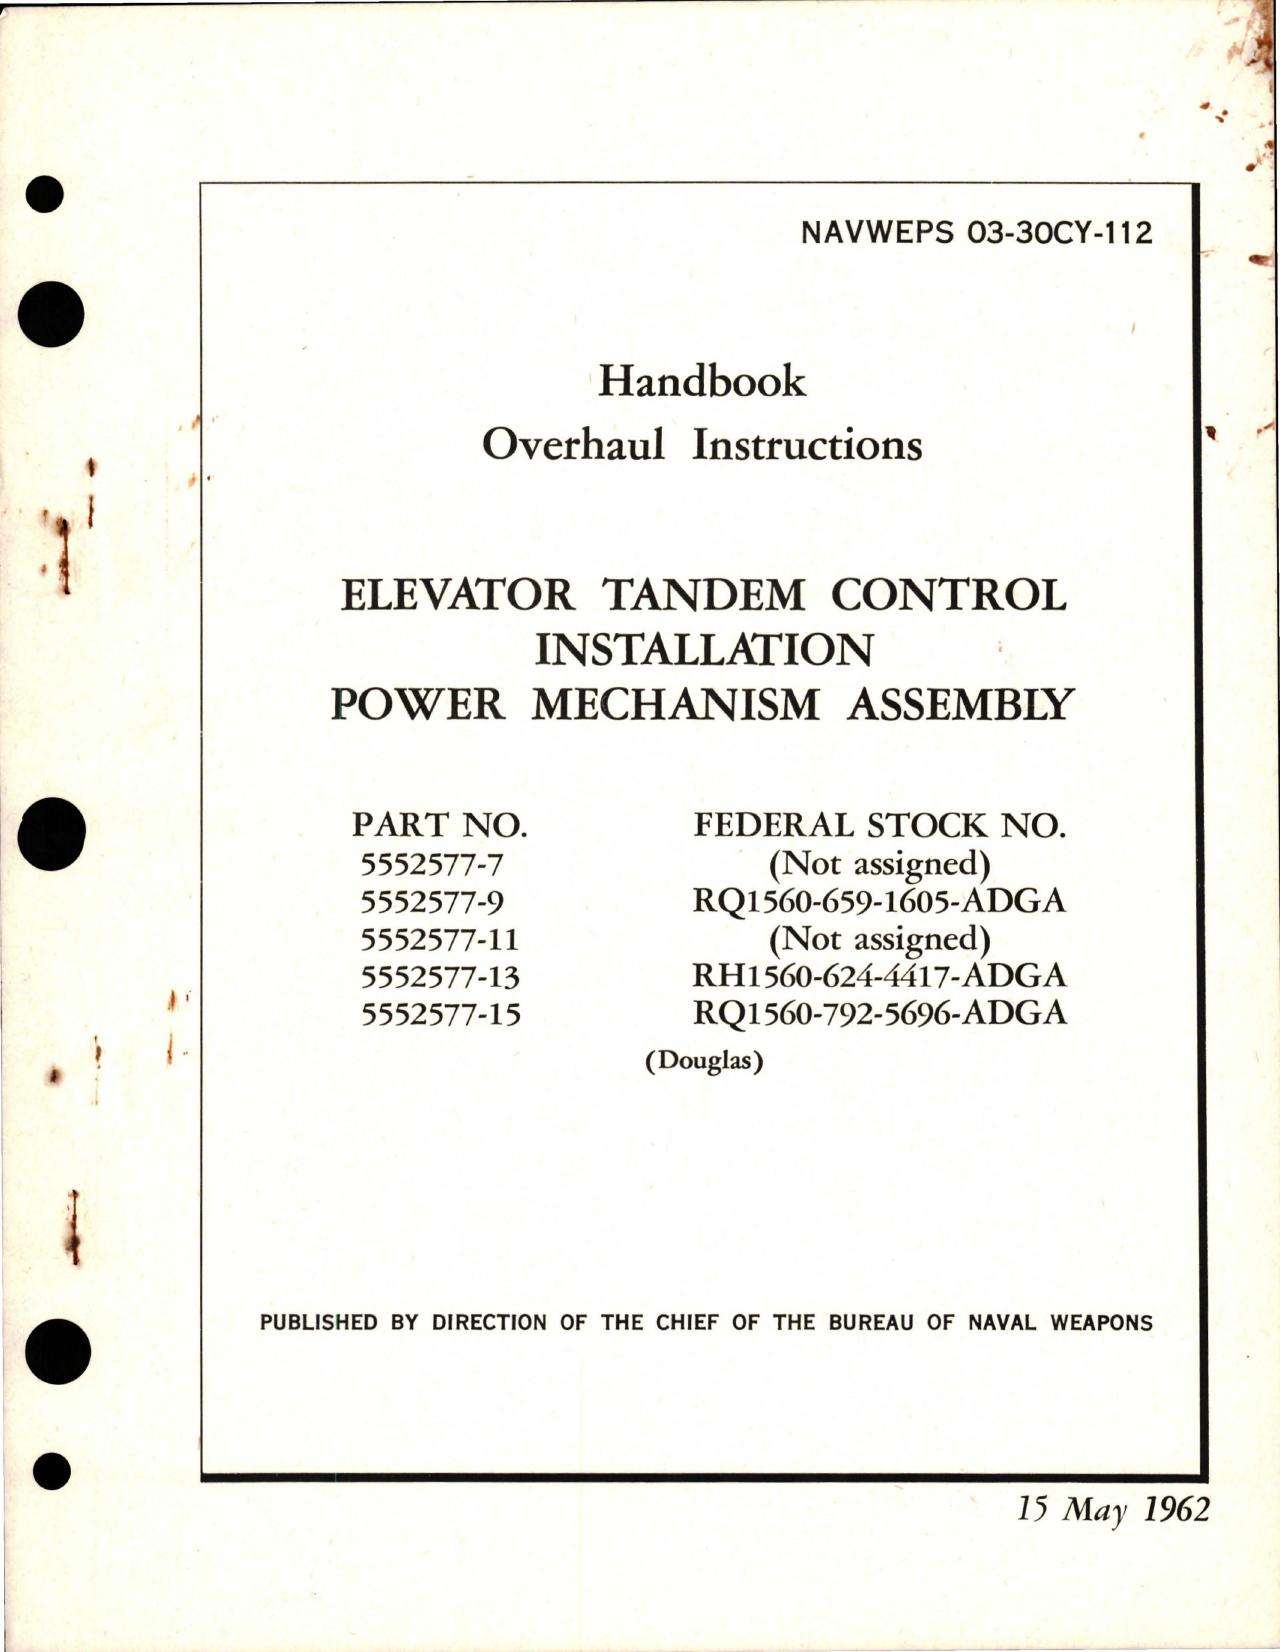 Sample page 1 from AirCorps Library document: Overhaul Instructions for Elevator Tandem Control Installation Power Mechanism Assembly